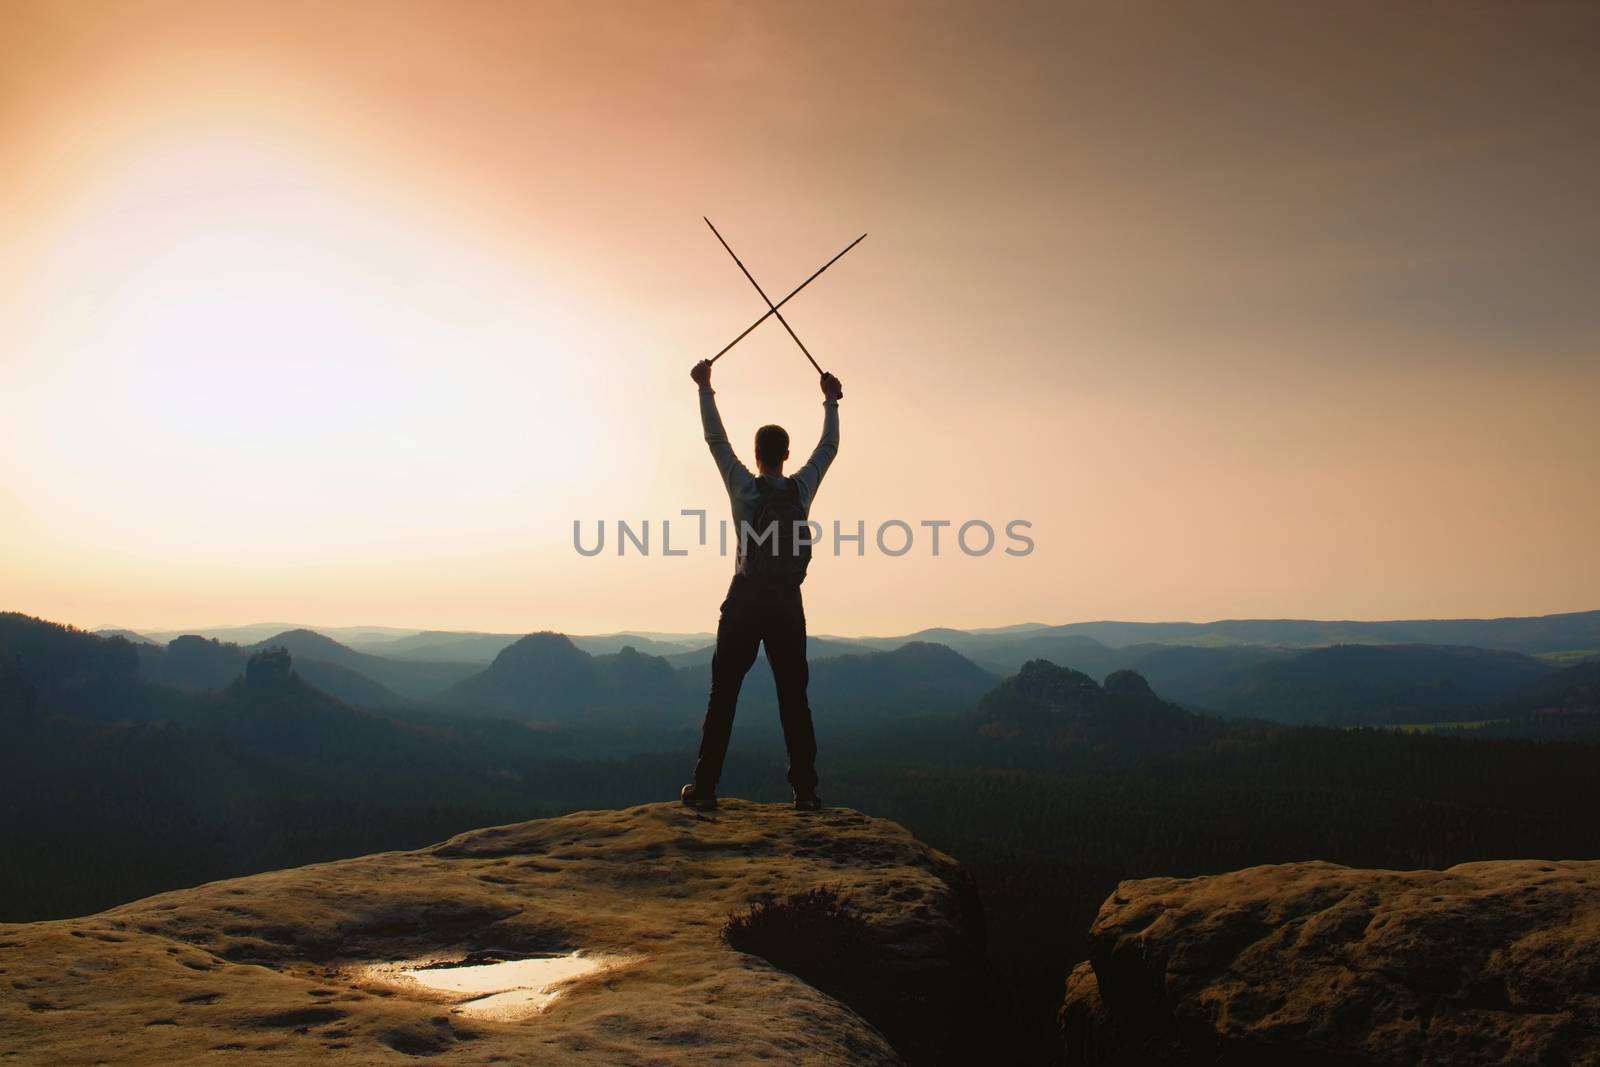 Man with crossed poles above head on cliff.  Foggy  mountain valley bellow. Happy tourist guide with poles in hands. Sunny spring daybreak in hills.